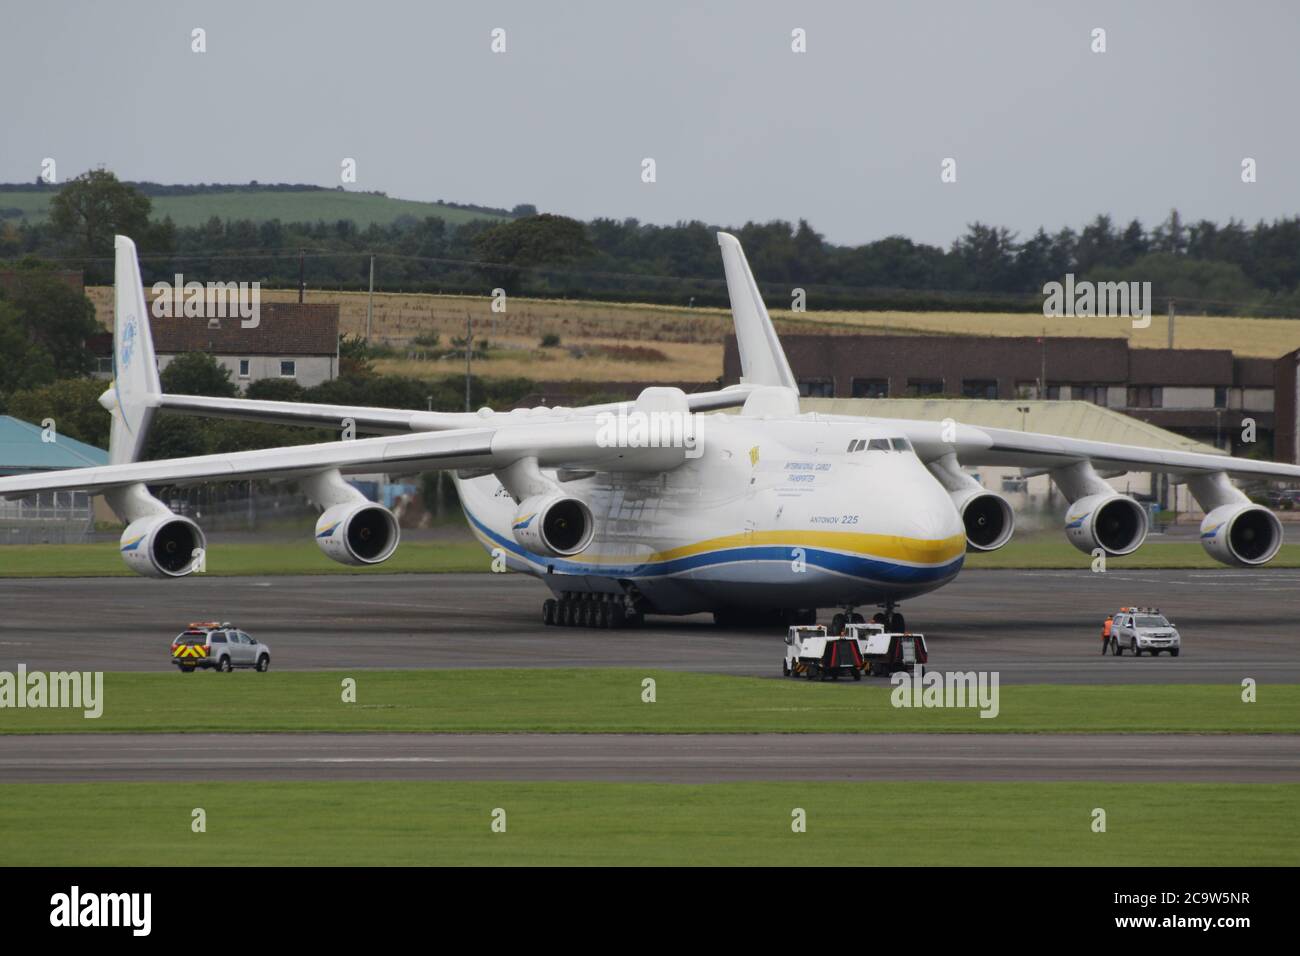 The largest plane in the world, the Antonov An-225 Mriya, stops off for refuelling at Prestwick International Airport in Ayrshire, Scotland. The aircraft, currently the only one of its kind completed, was initially built to transport the Buran space shuttle, and then served in the Soviet military as a strategic airlifter. It is now operated by Antonov Airlines to transport oversized loads, and today's visit was a scheduled fuel stop after departing Bangor earlier this morning. It then left Prestwick to continue its journey to Chateauroux in France. Stock Photo